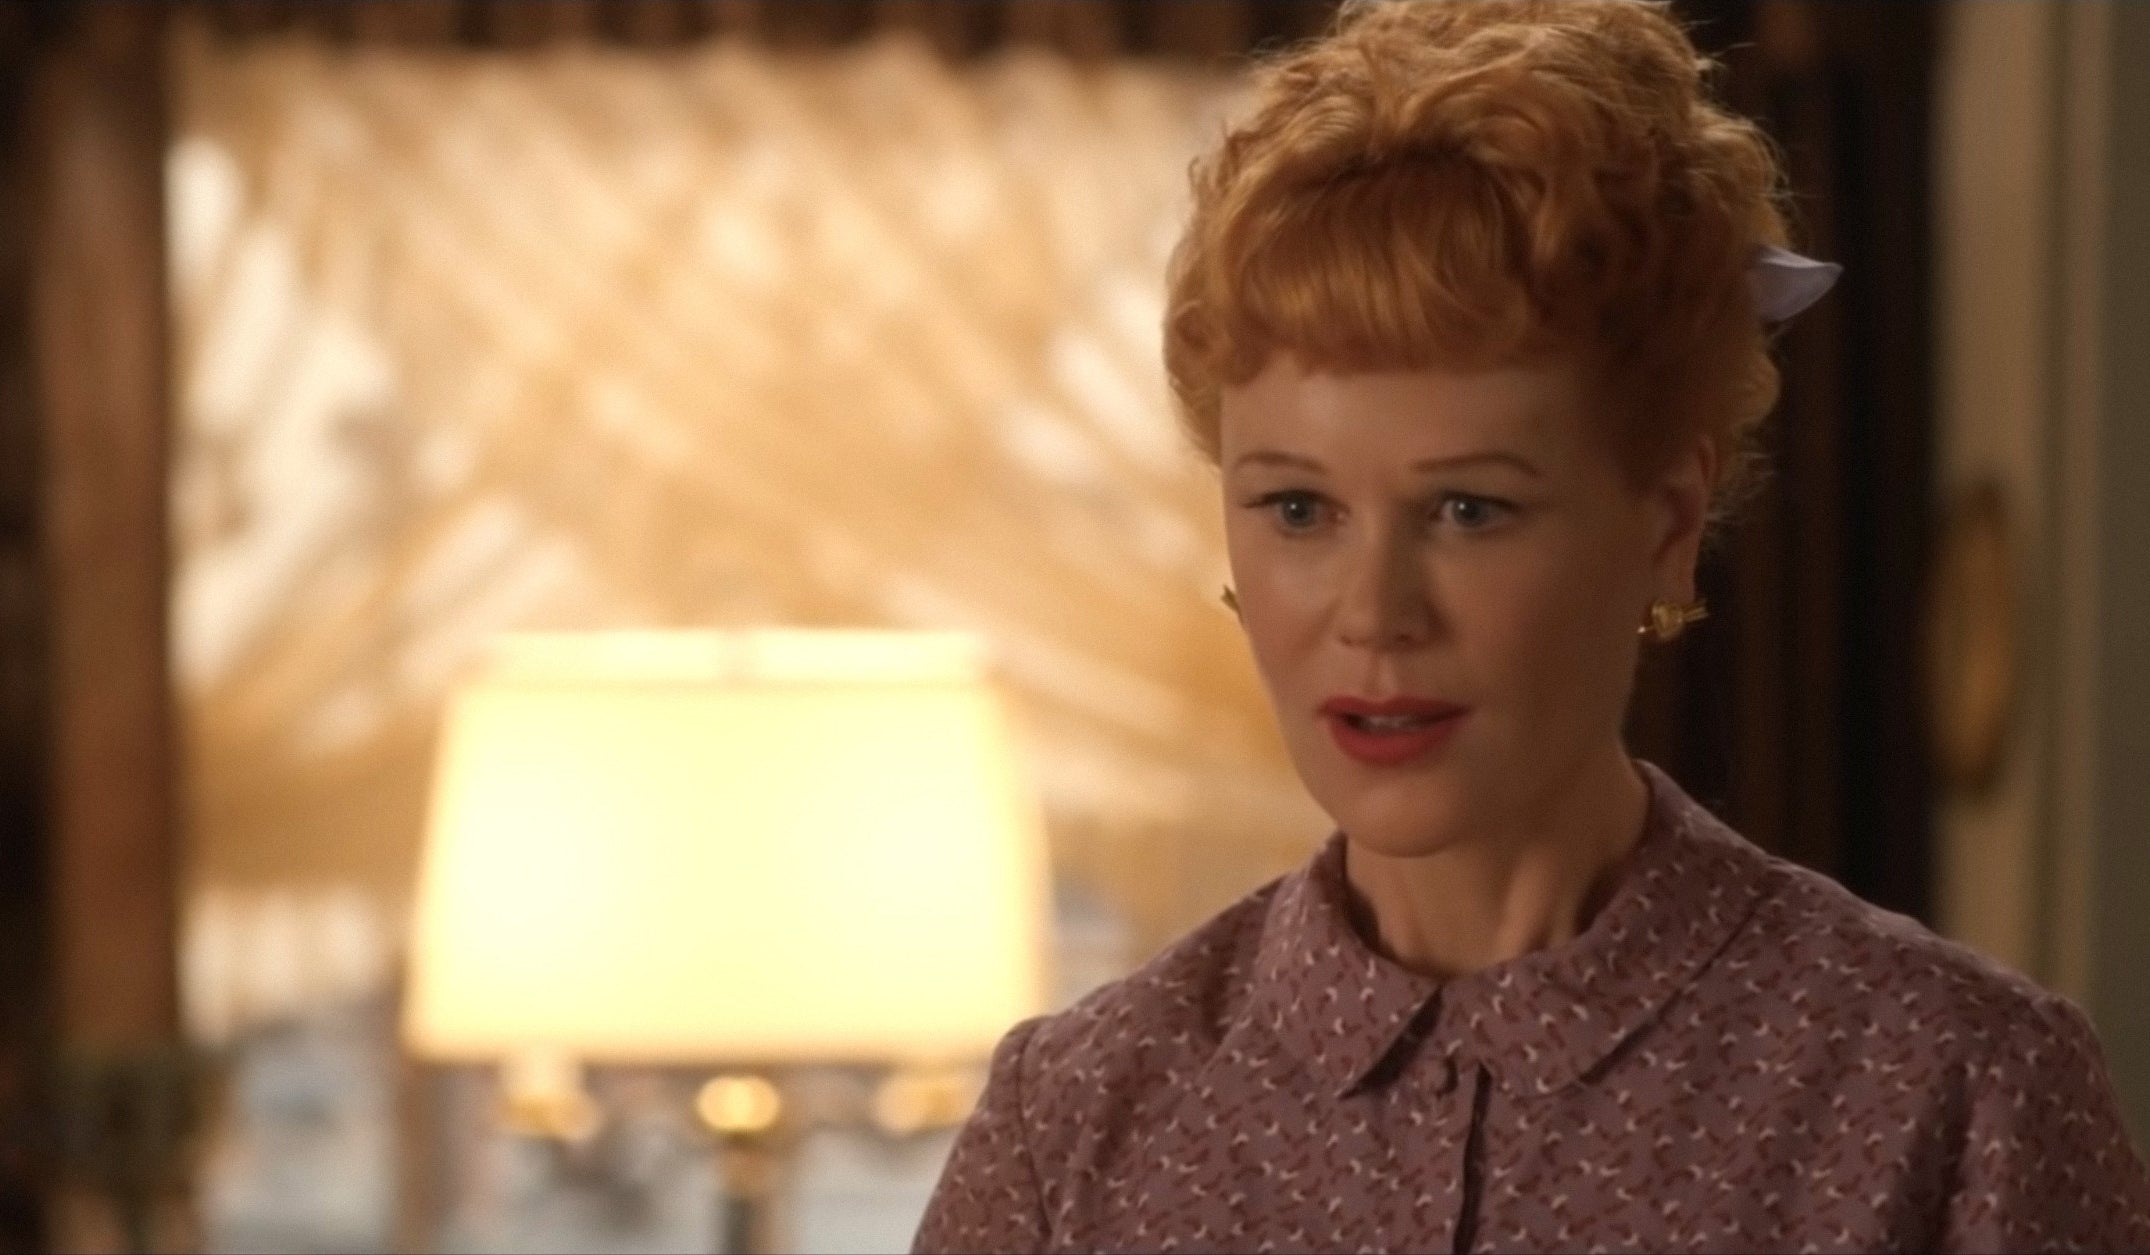 Nicole Kidman as redhead Lucille Ball, with bangs and an updo